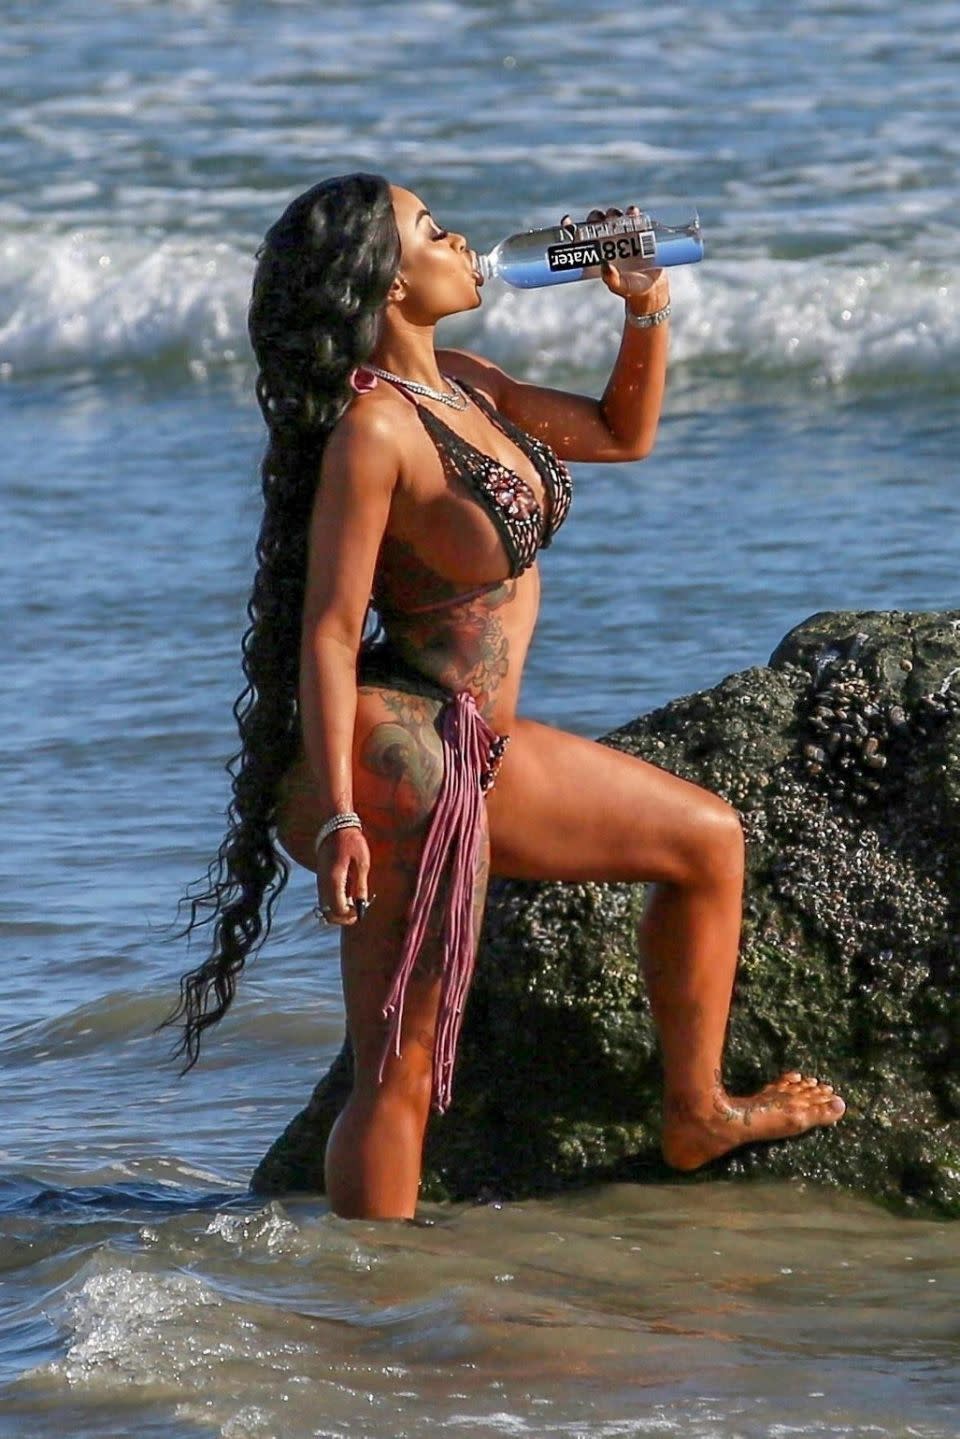 It appeared to be tiring work for Rob Kardashian's ex as she was sipping on some water the entire time. Source: Backgrid